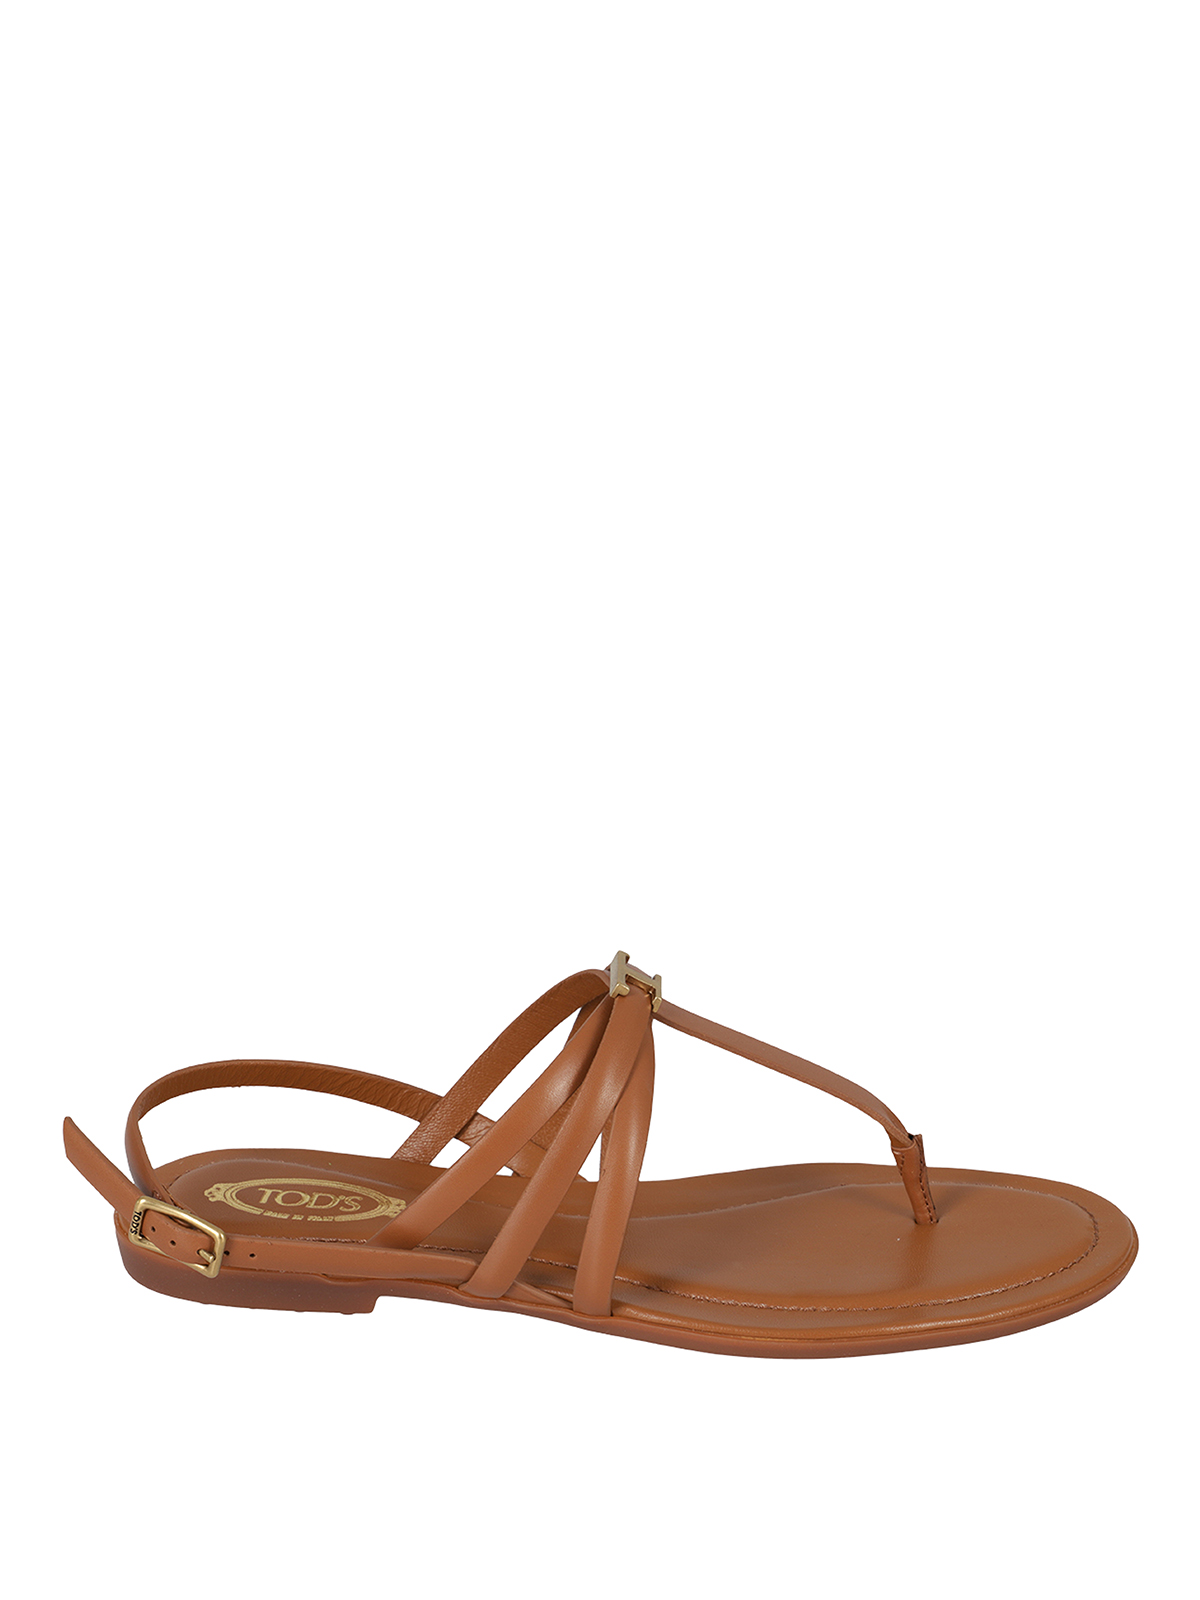 TOD'S LEATHER THONG SANDALS